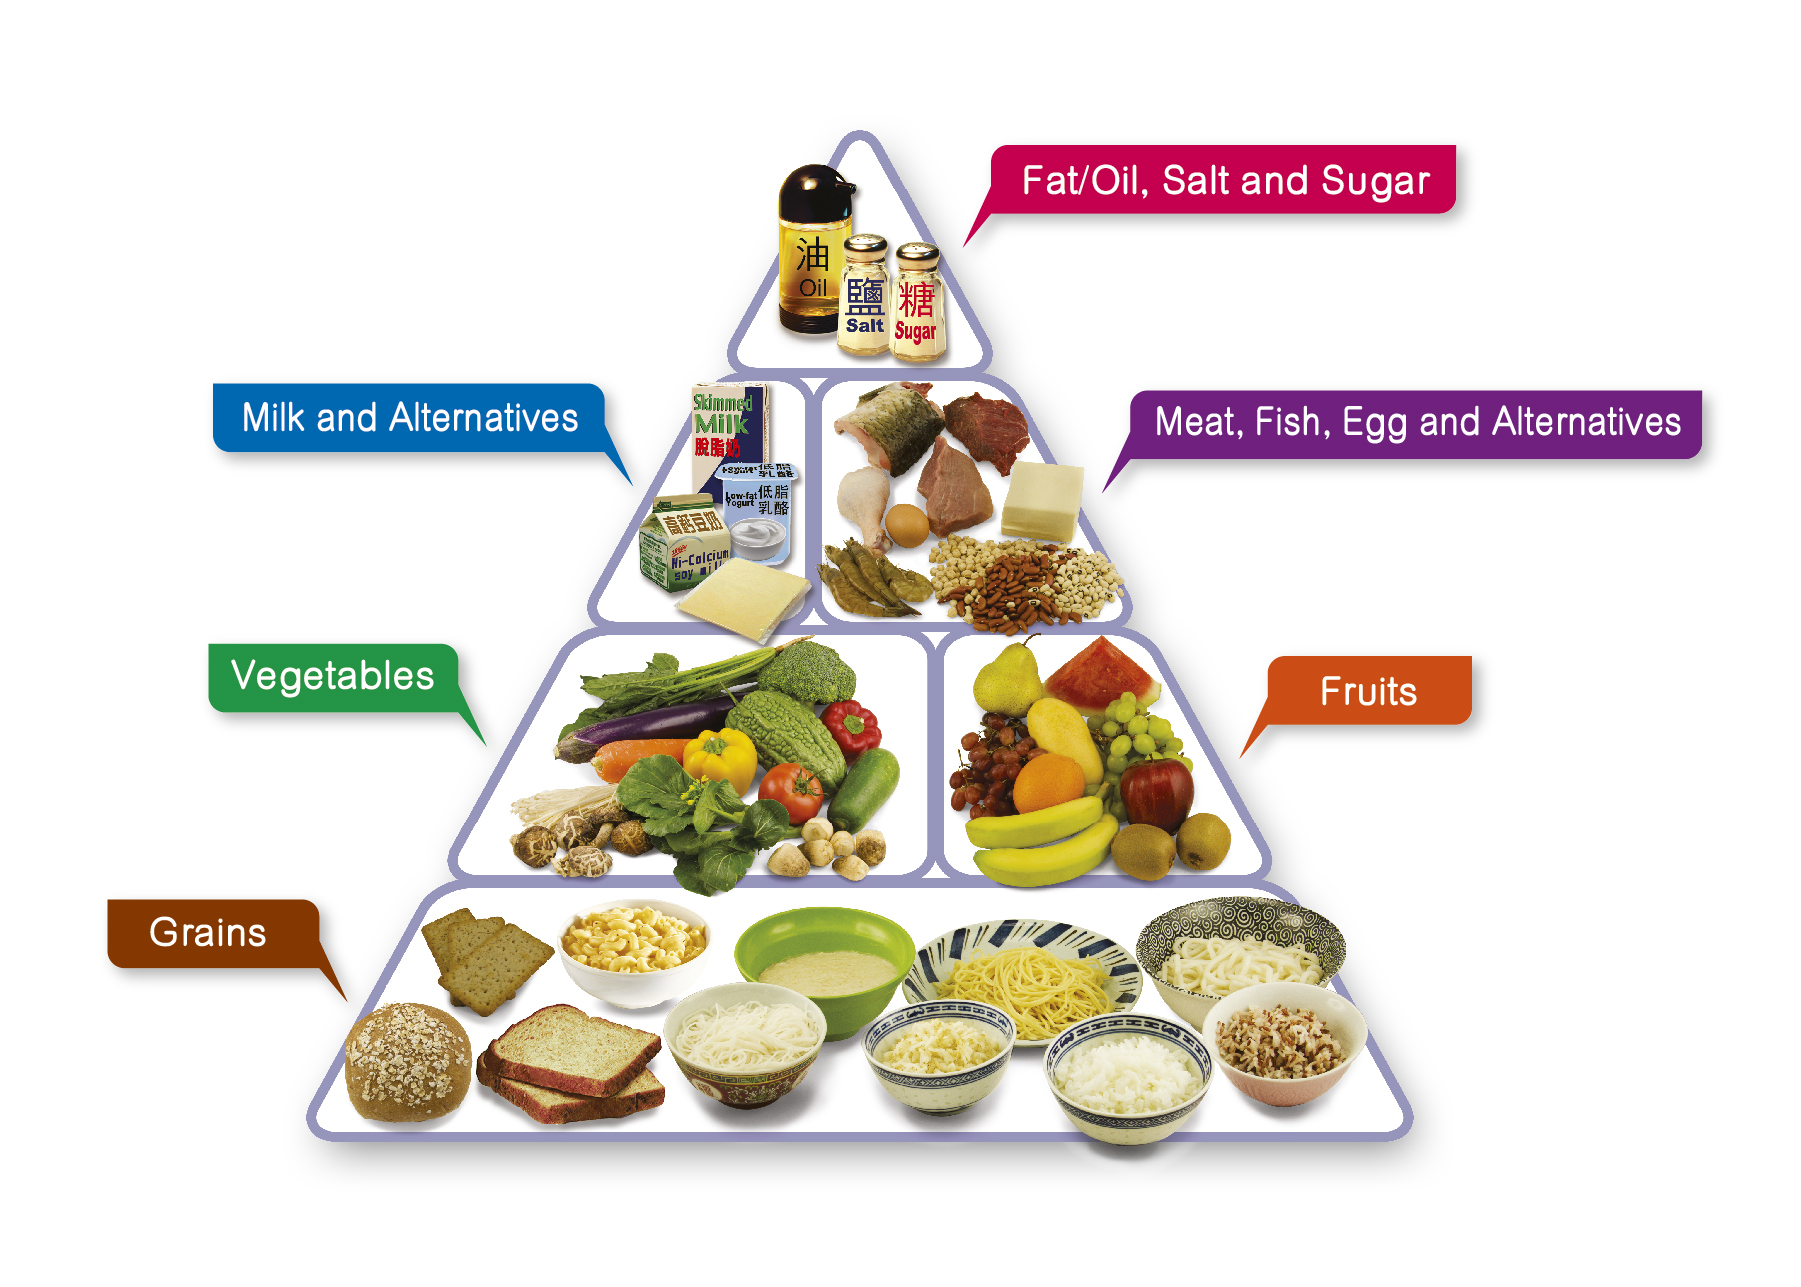 A pyramid divided into sections shows the proportions of different food groups in a balanced diet. The food groups are grains, vegetables, fruits, meat/fish/egg/alternatives, milk/alternatives, and fats/salt/sugar.